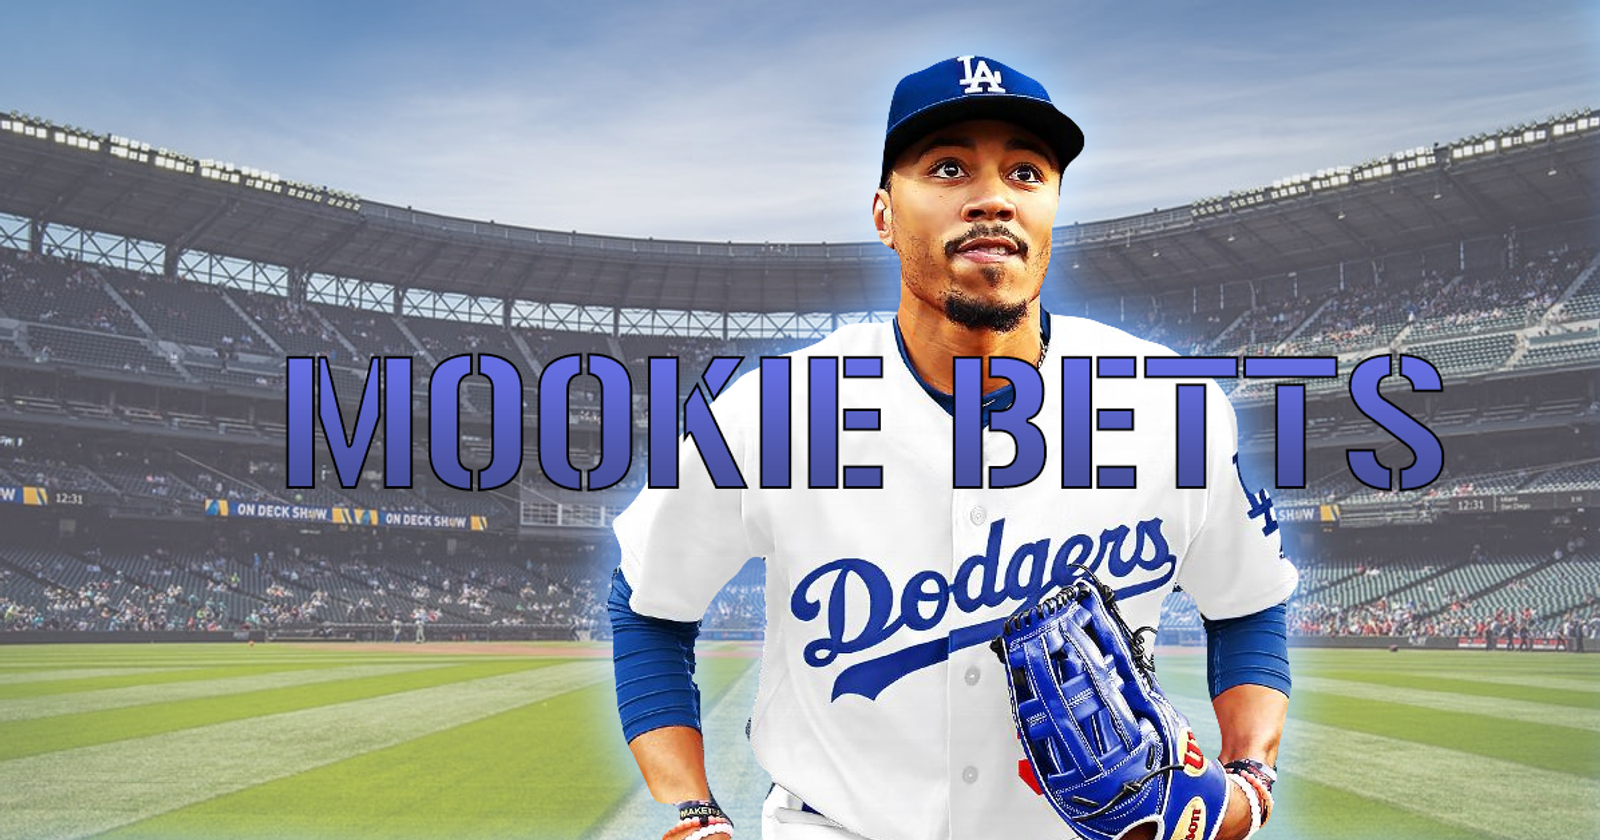 MLB The Show 20: Mookie Betts trade will make LA Dodgers the best